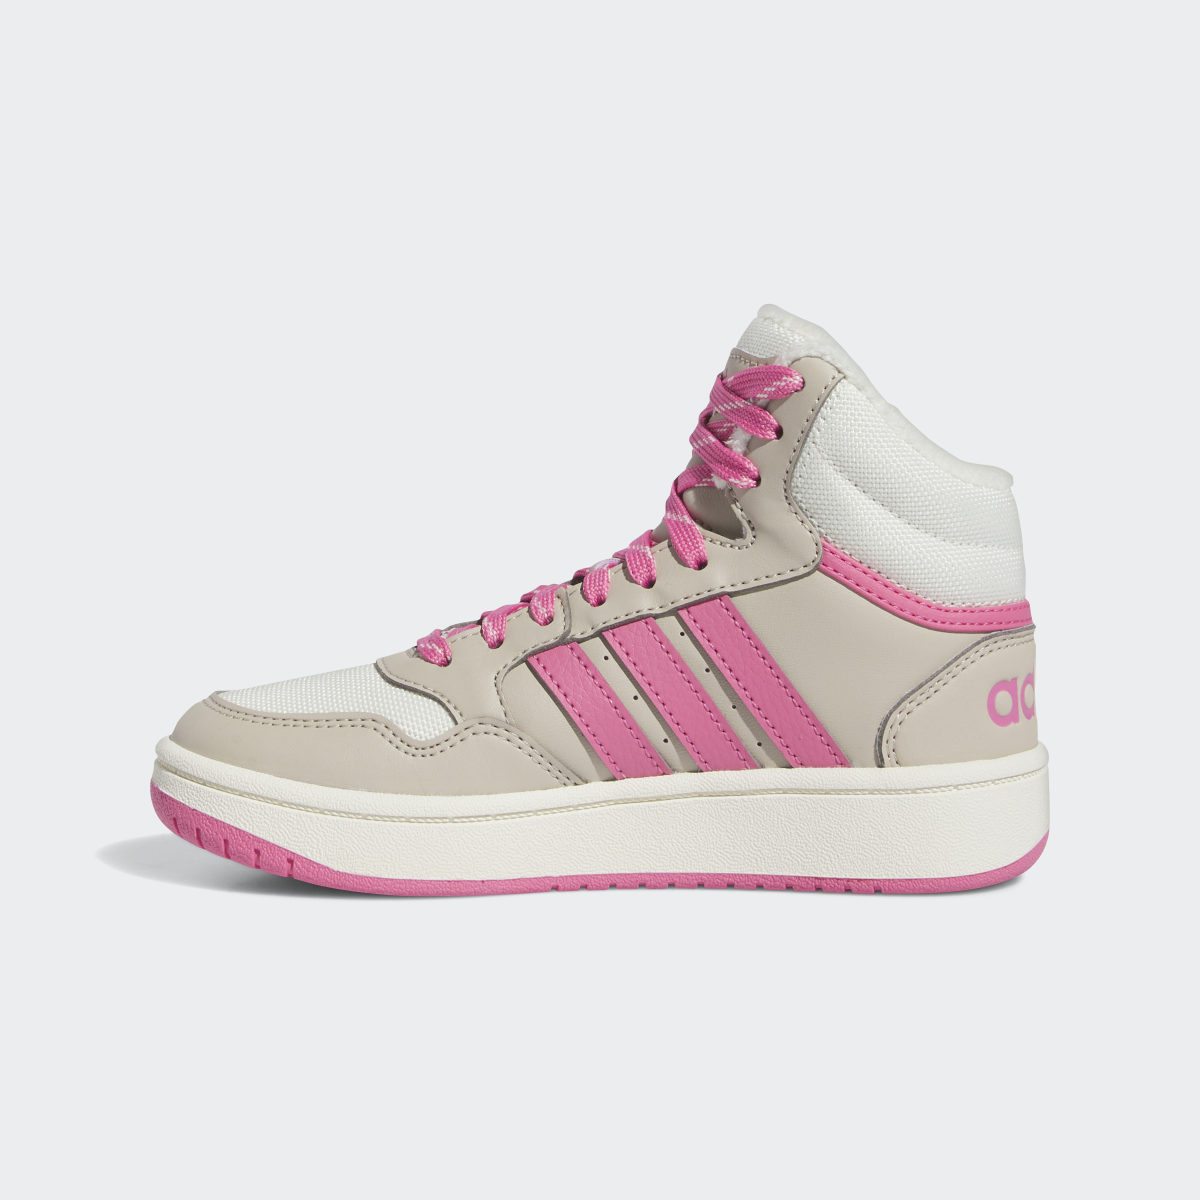 Adidas Hoops Mid 3.0 Shoes Kids. 6